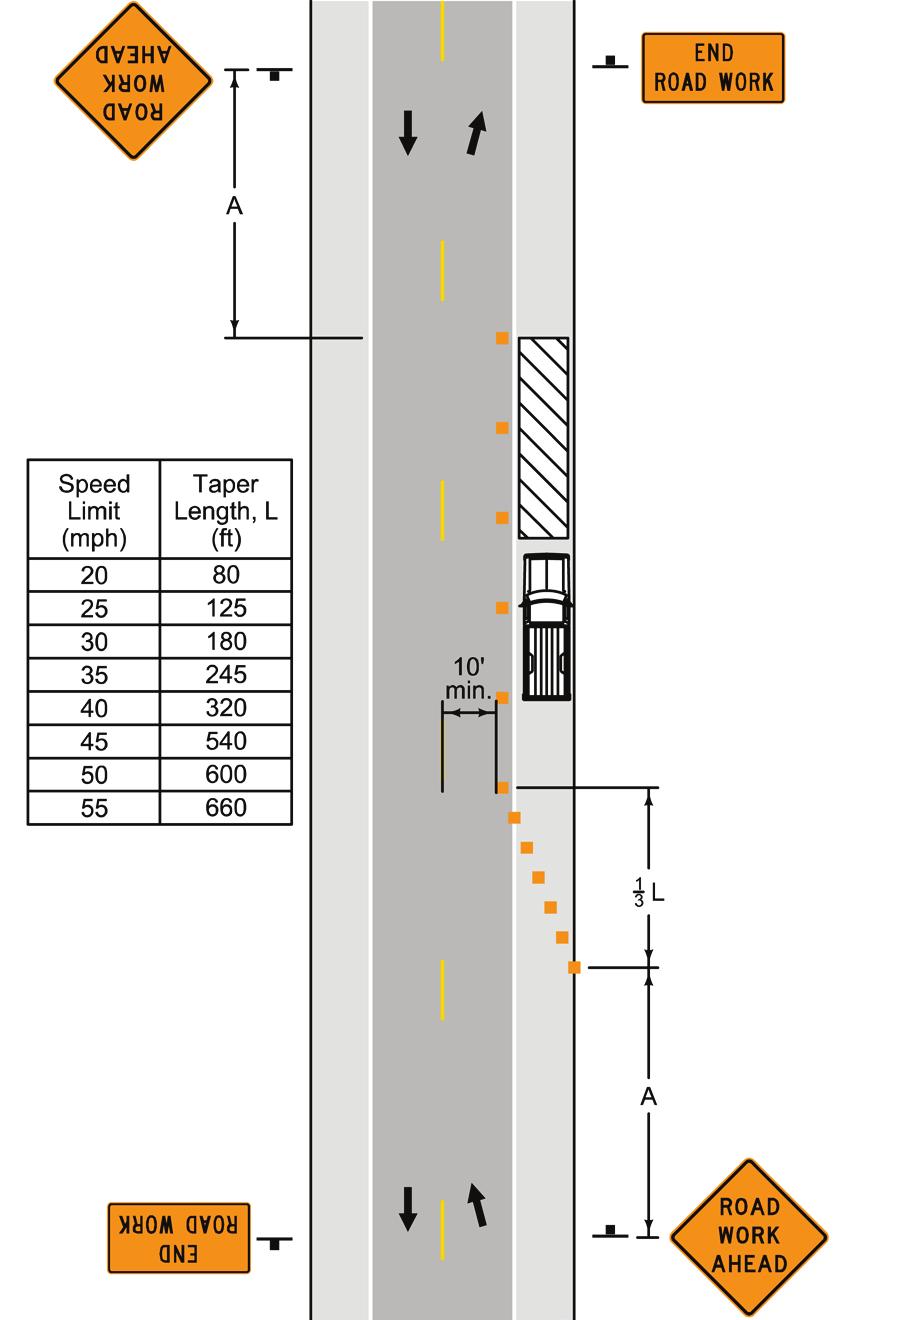 3. WORK OFF OF PAVEMENT WITH MINOR ENCROACHMENT ONTO TRAVELED WAY Use only on a minor, low-speed street or road for items such as culvert work, shoulder work, utility operations, and guardrail